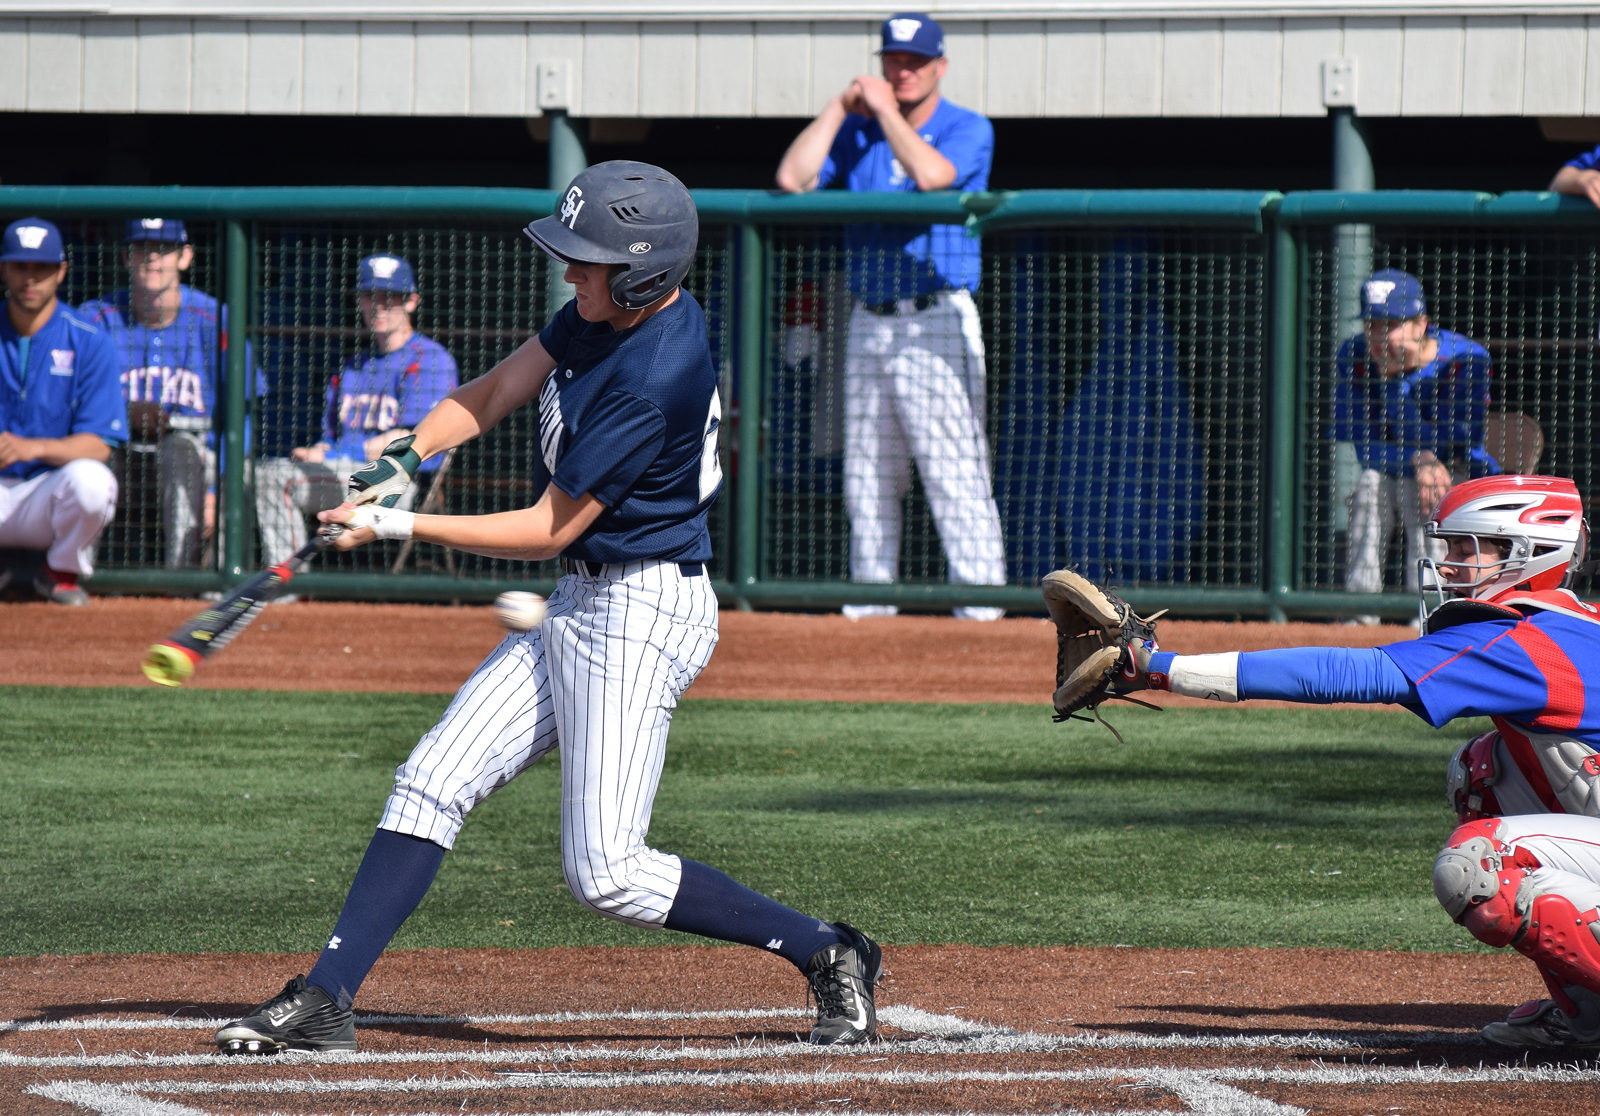 Soldotna batter Cody Quelland takes a strike against Sitka pitcher Vaughn Blankenship in a state tournament quarterfinal Thursday at Mulcahy Field in Anchorage.